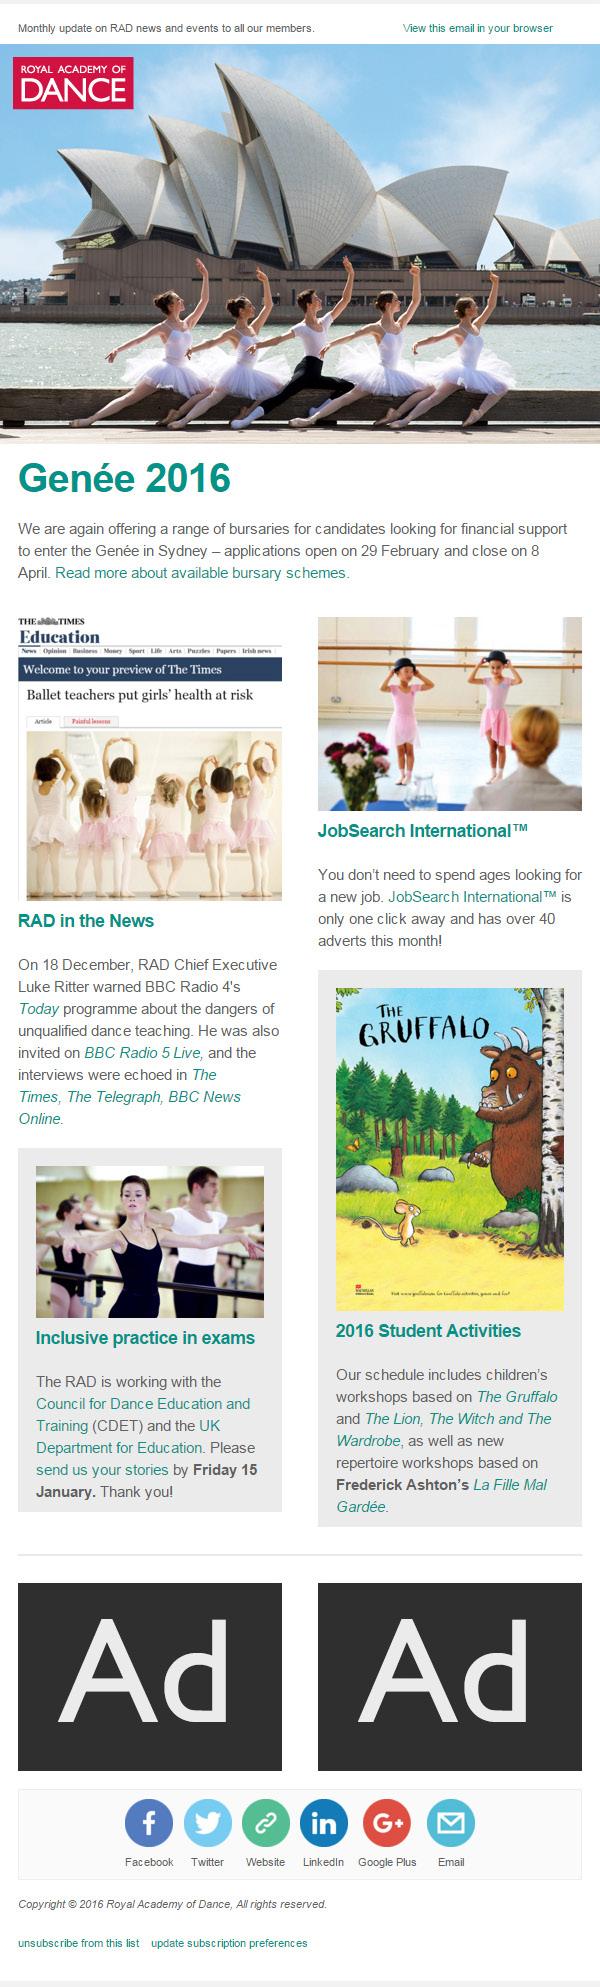 RAD E-news E-news is the RAD s main monthly digital communication reaching a global audience within the dance industry.